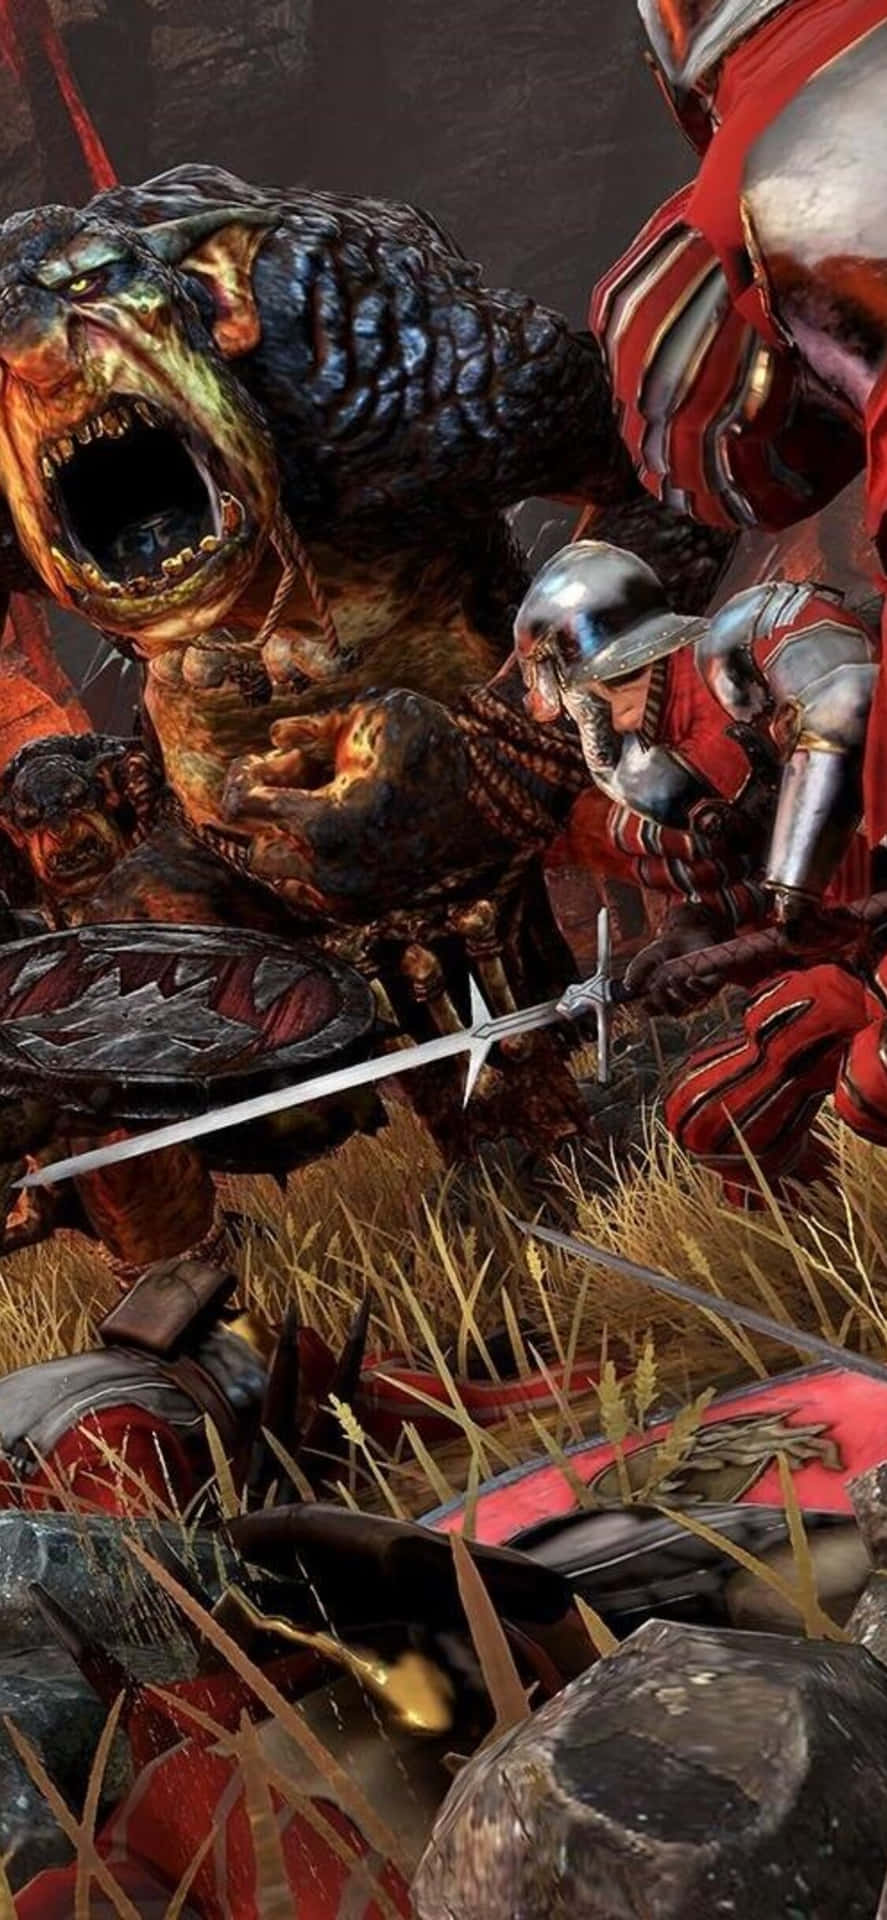 Experience the ultimate fantasy warfare with Iphone X and Total War Warhammer